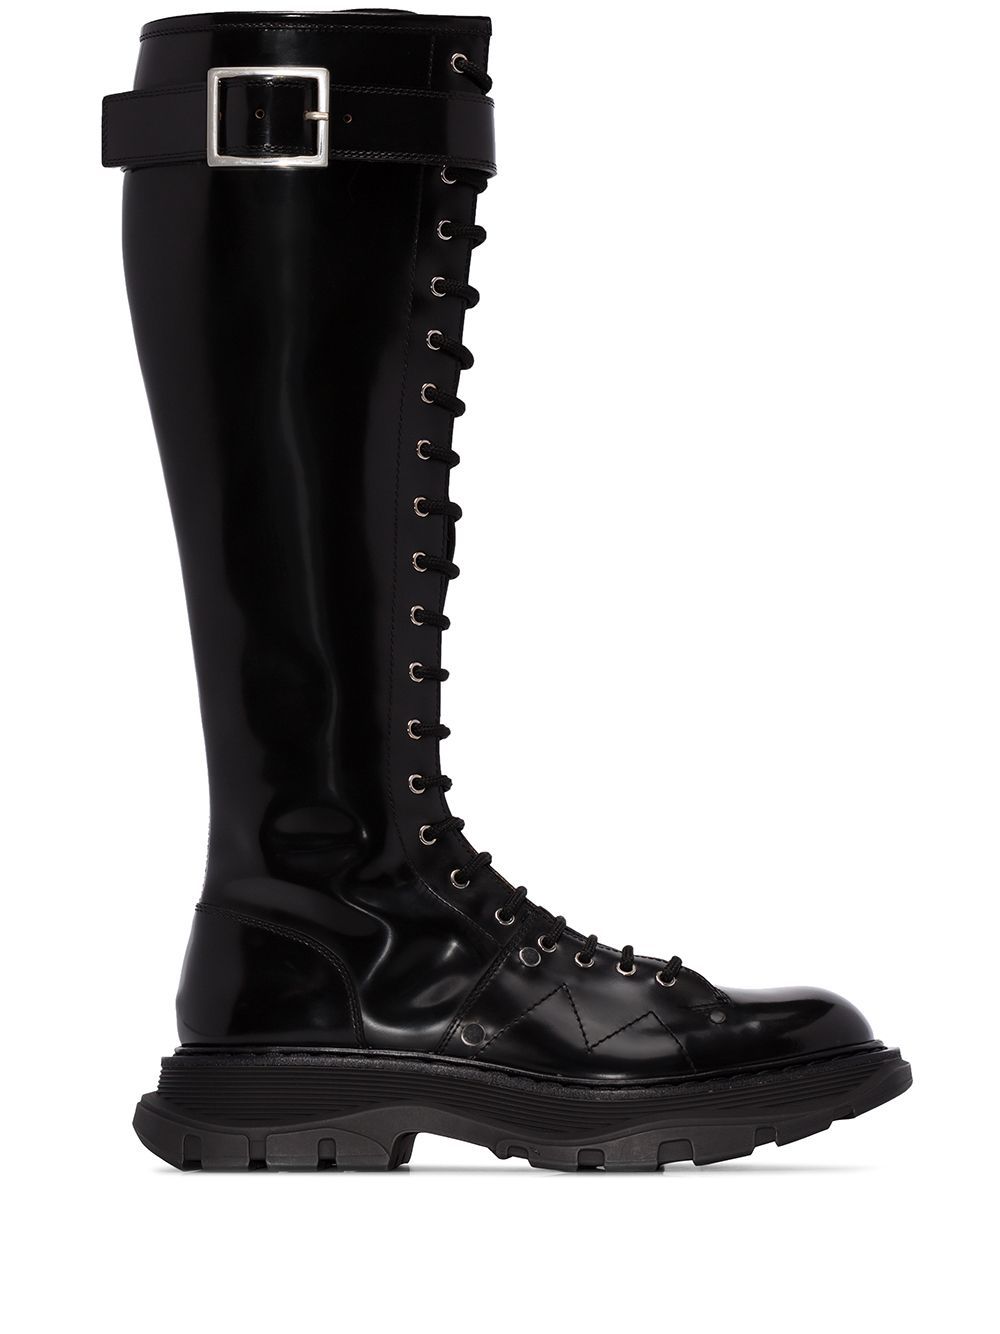 Black leather Tread lace-up leather boot